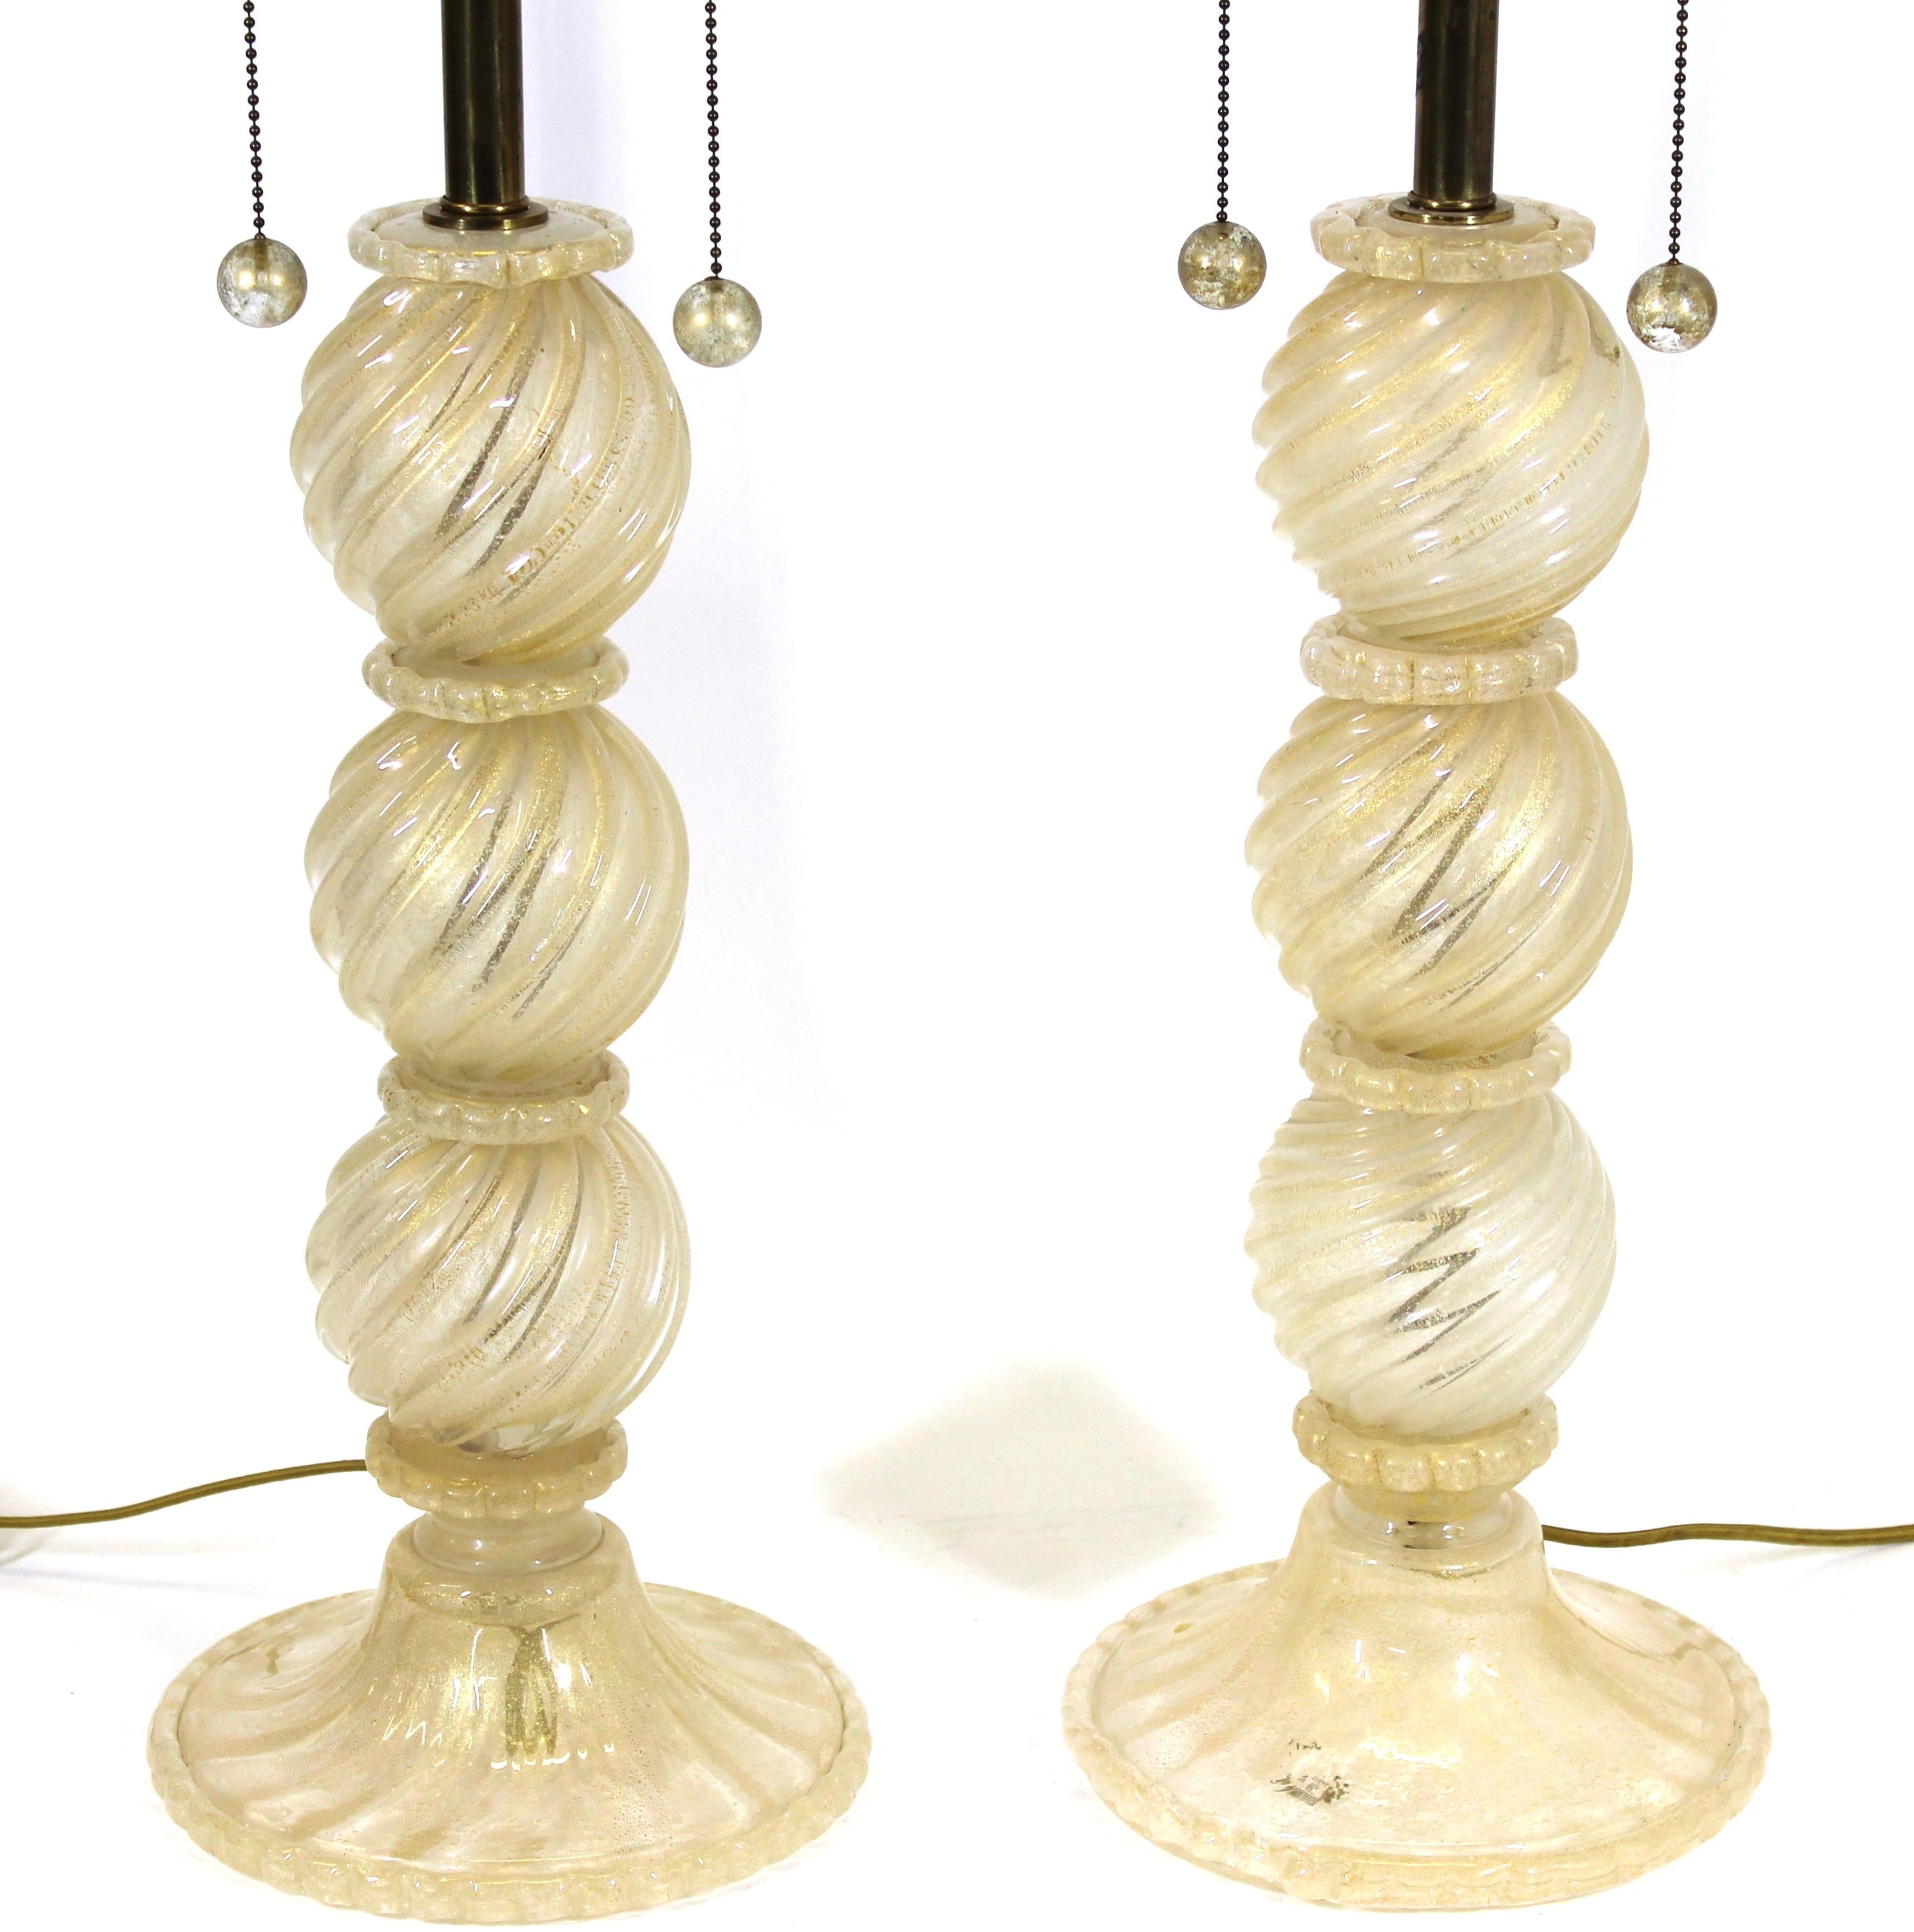 Barovier attributed pair of Italian Hollywood regency style Murano glass table lamps with gold-flecked glass.